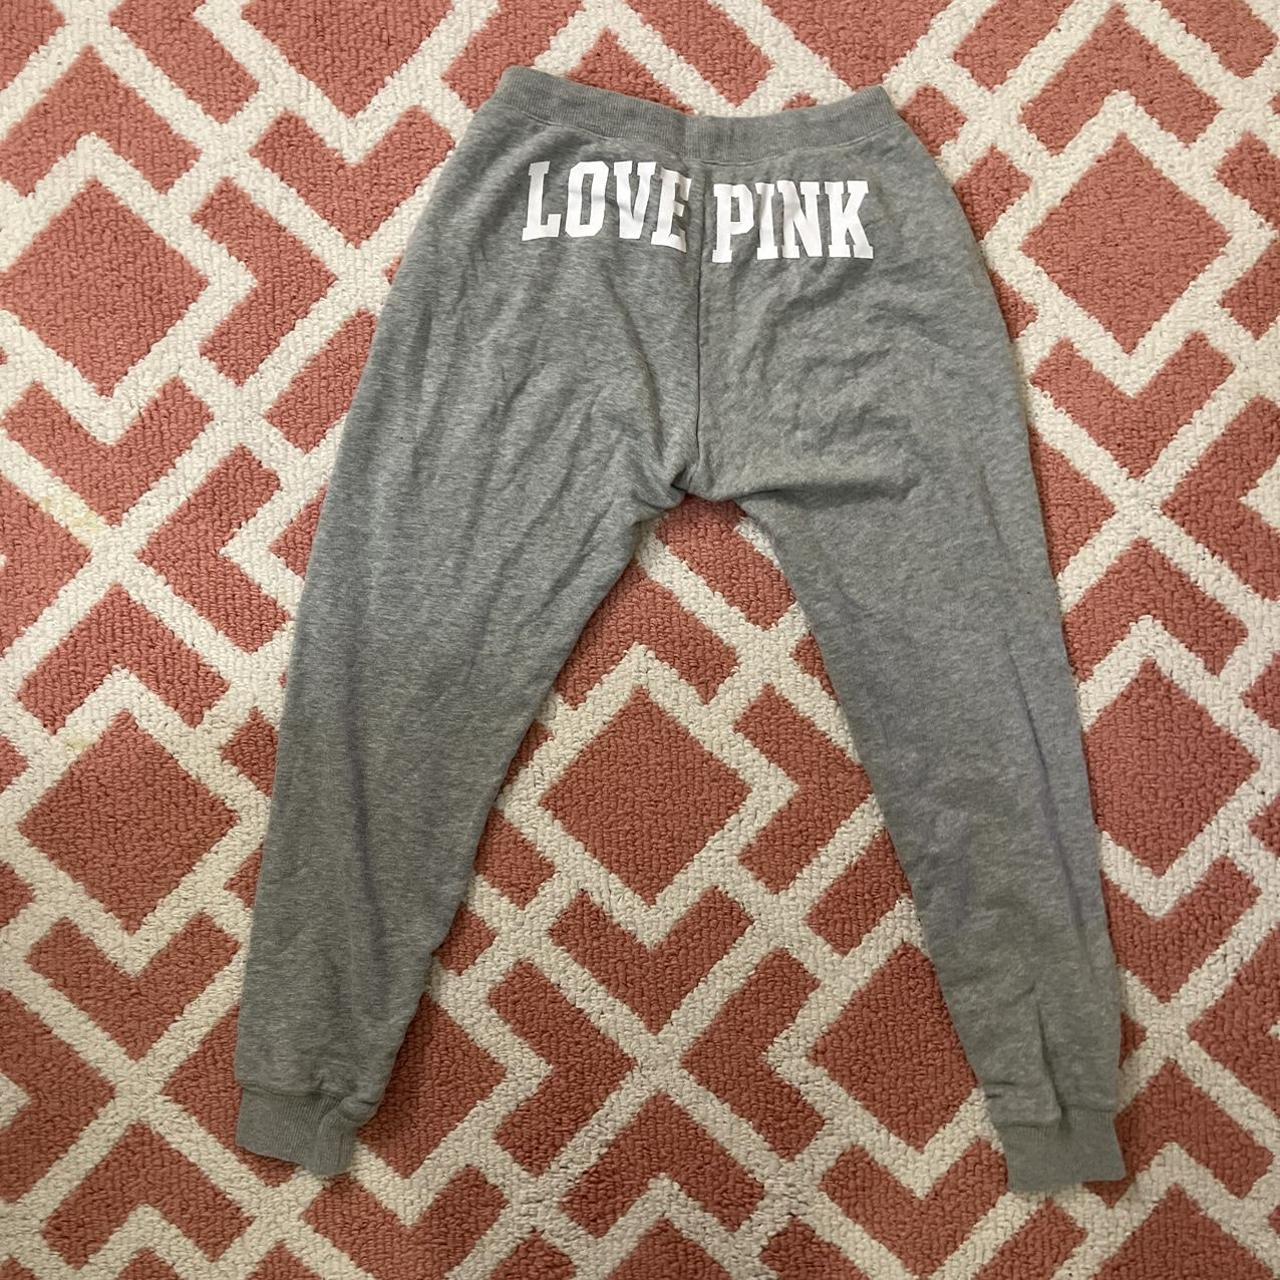 XS vs pink sweatpants. These fit me and I'm a - Depop